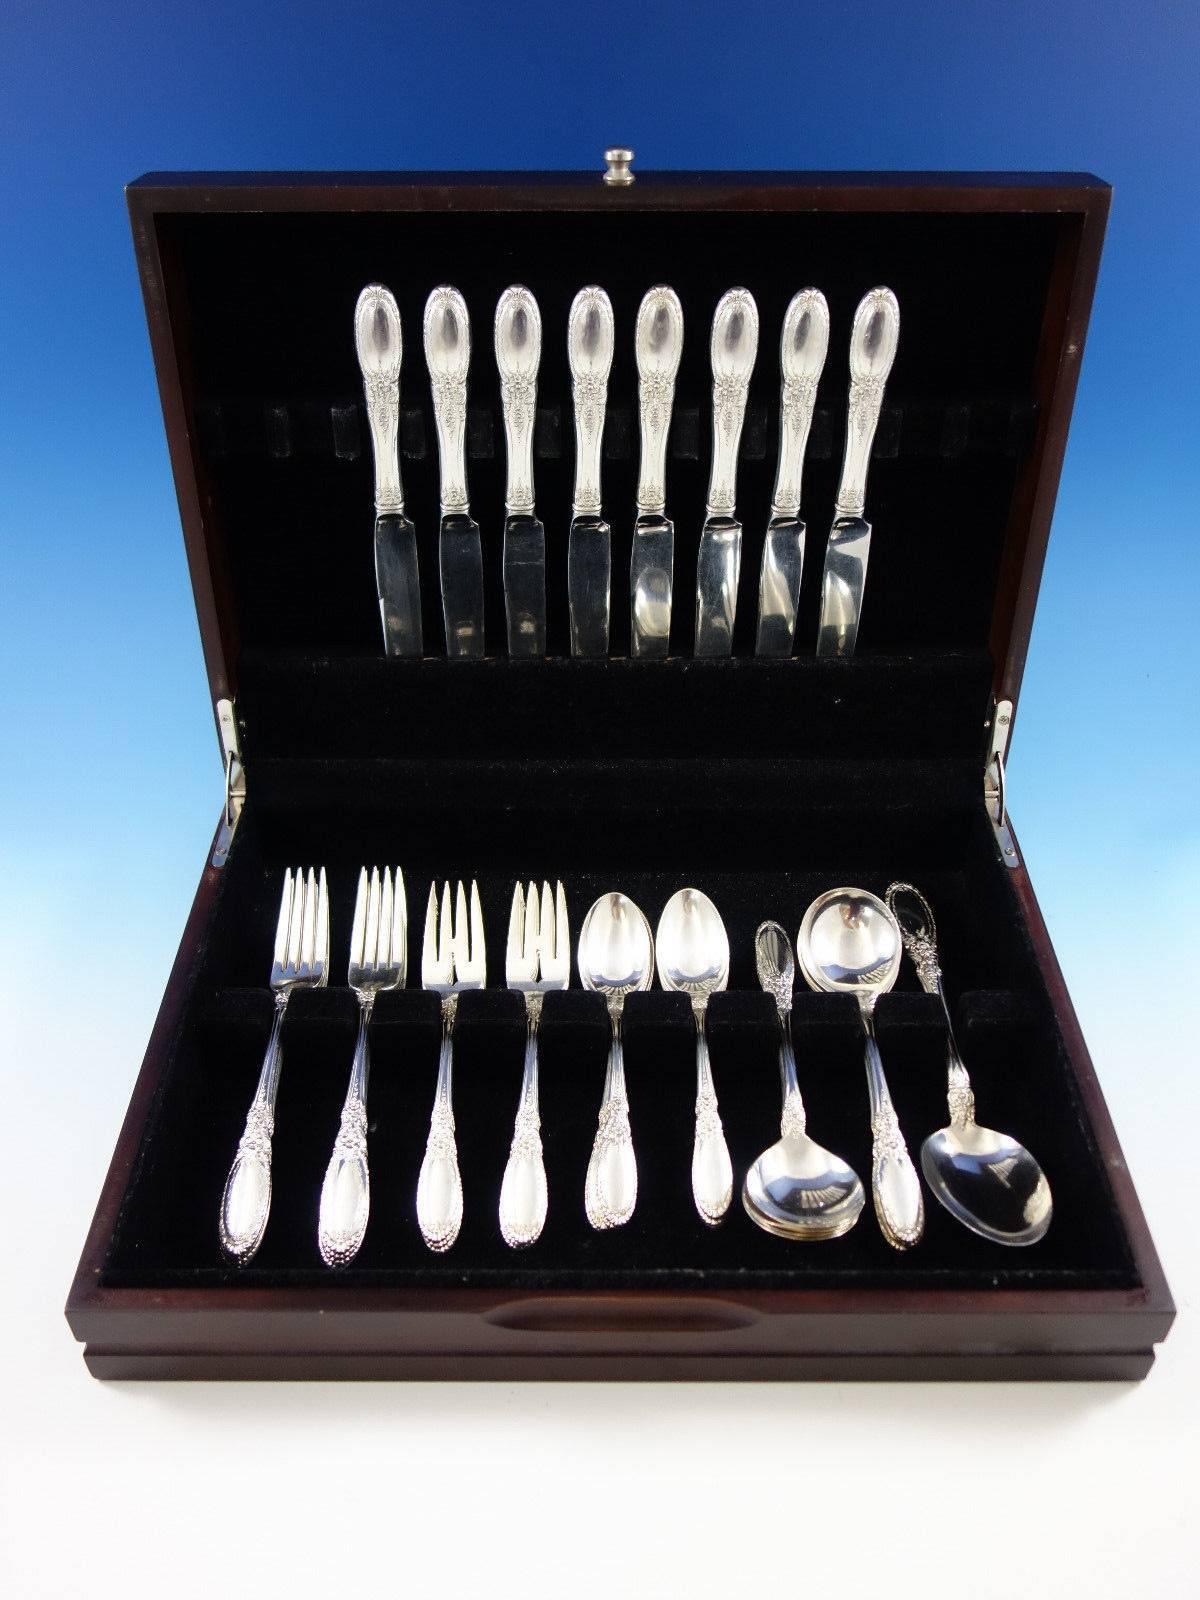 Old mirror by Towle sterling silver flatware set of 41 pieces. This set includes:

Eight knives, 8 7/8